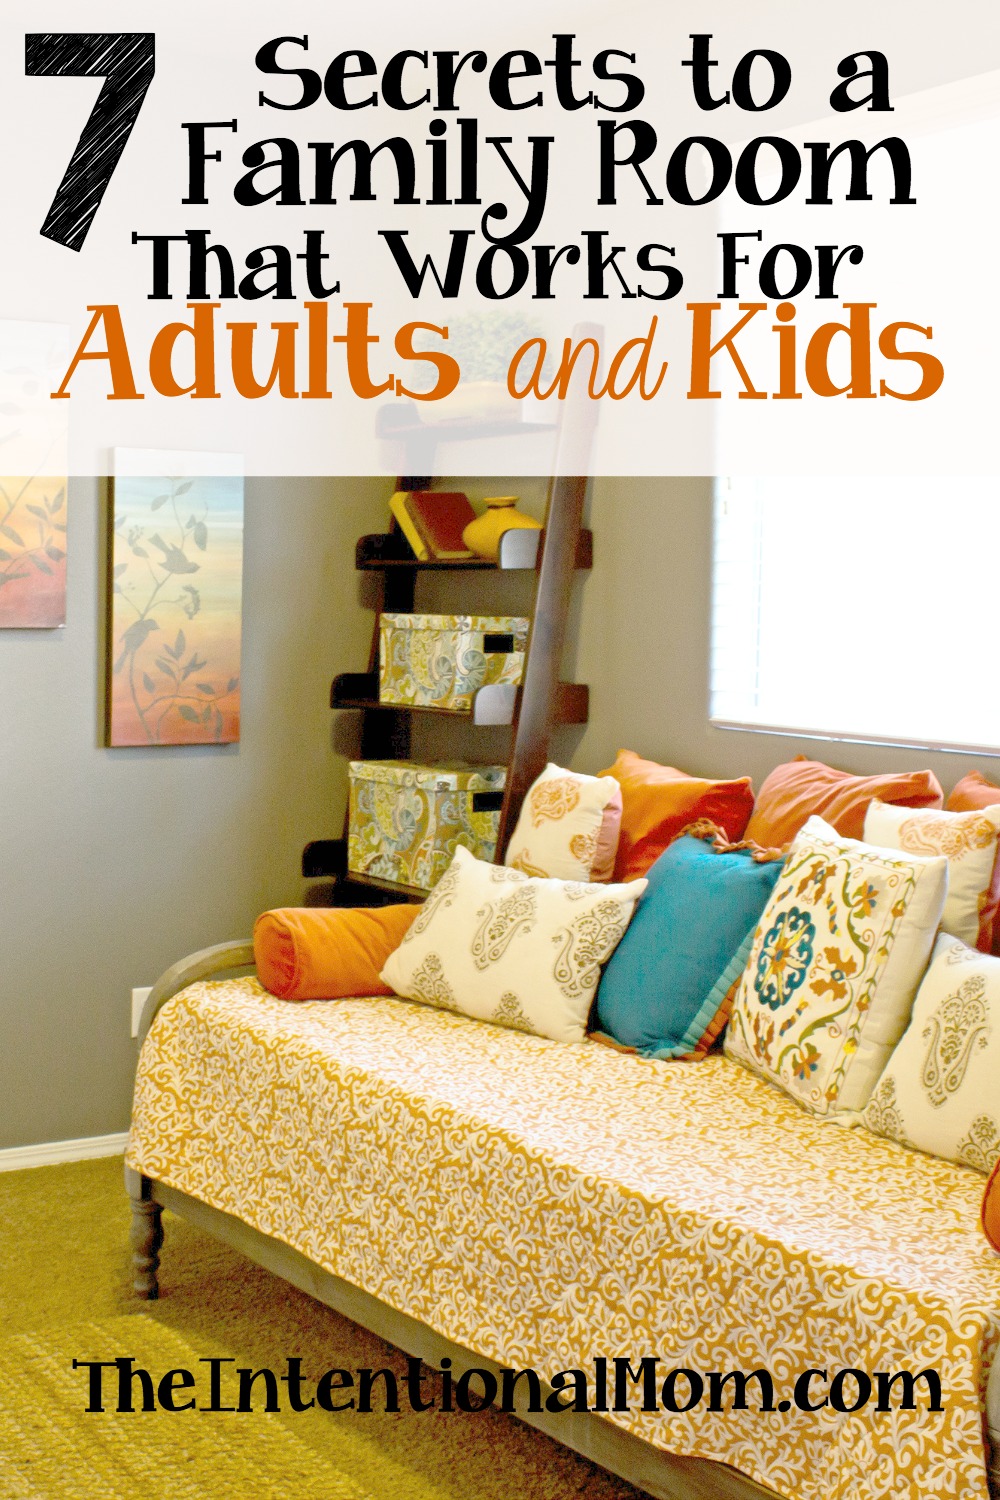 7 Secrets to a Family Room That Works For Parents AND Kids